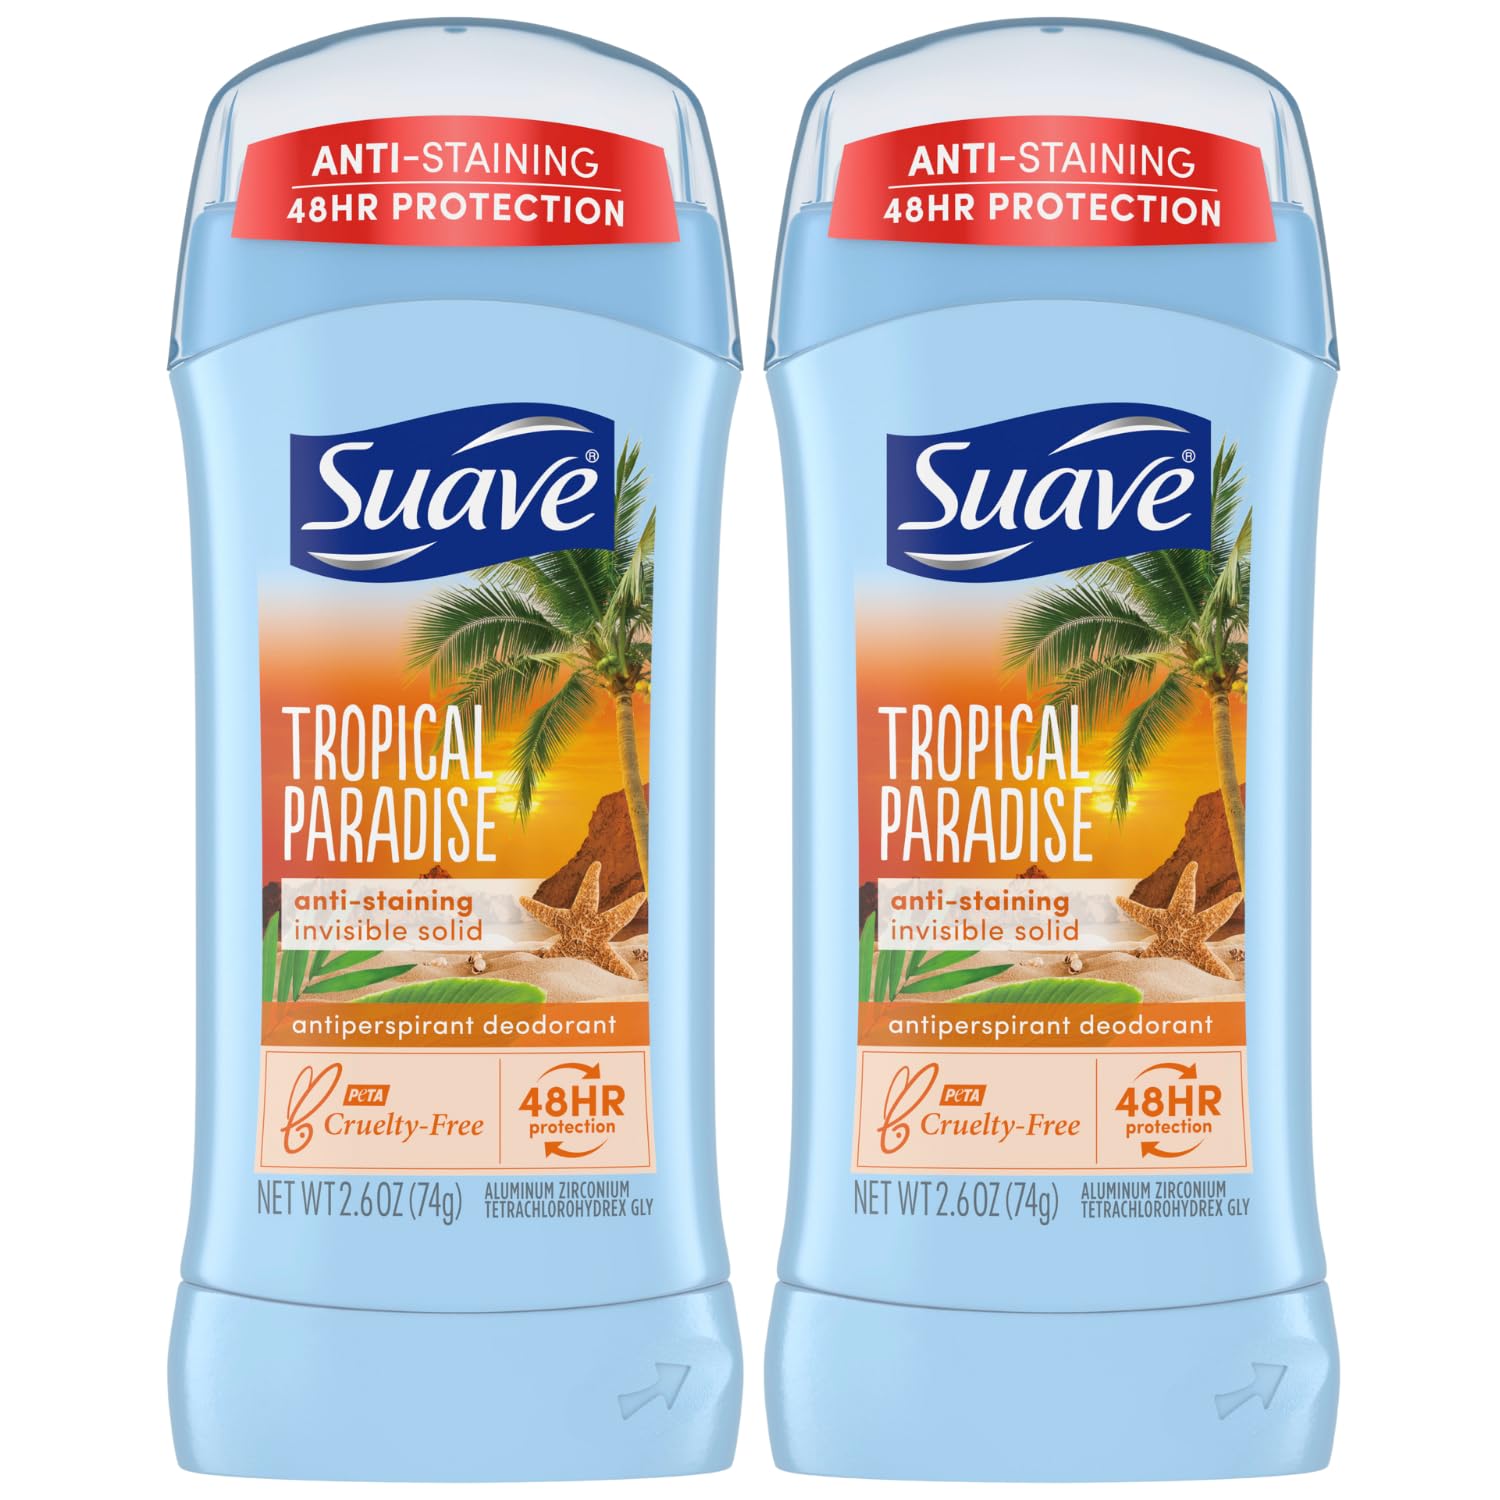 Suave Deodorant for Women, Tropical Paradise – Invisible Solid Antiperspirant Deodorant Stick, 48H Protection, Anti-Staining, Cruelty-Free, Scented, 2.6 Oz (Pack of 2)